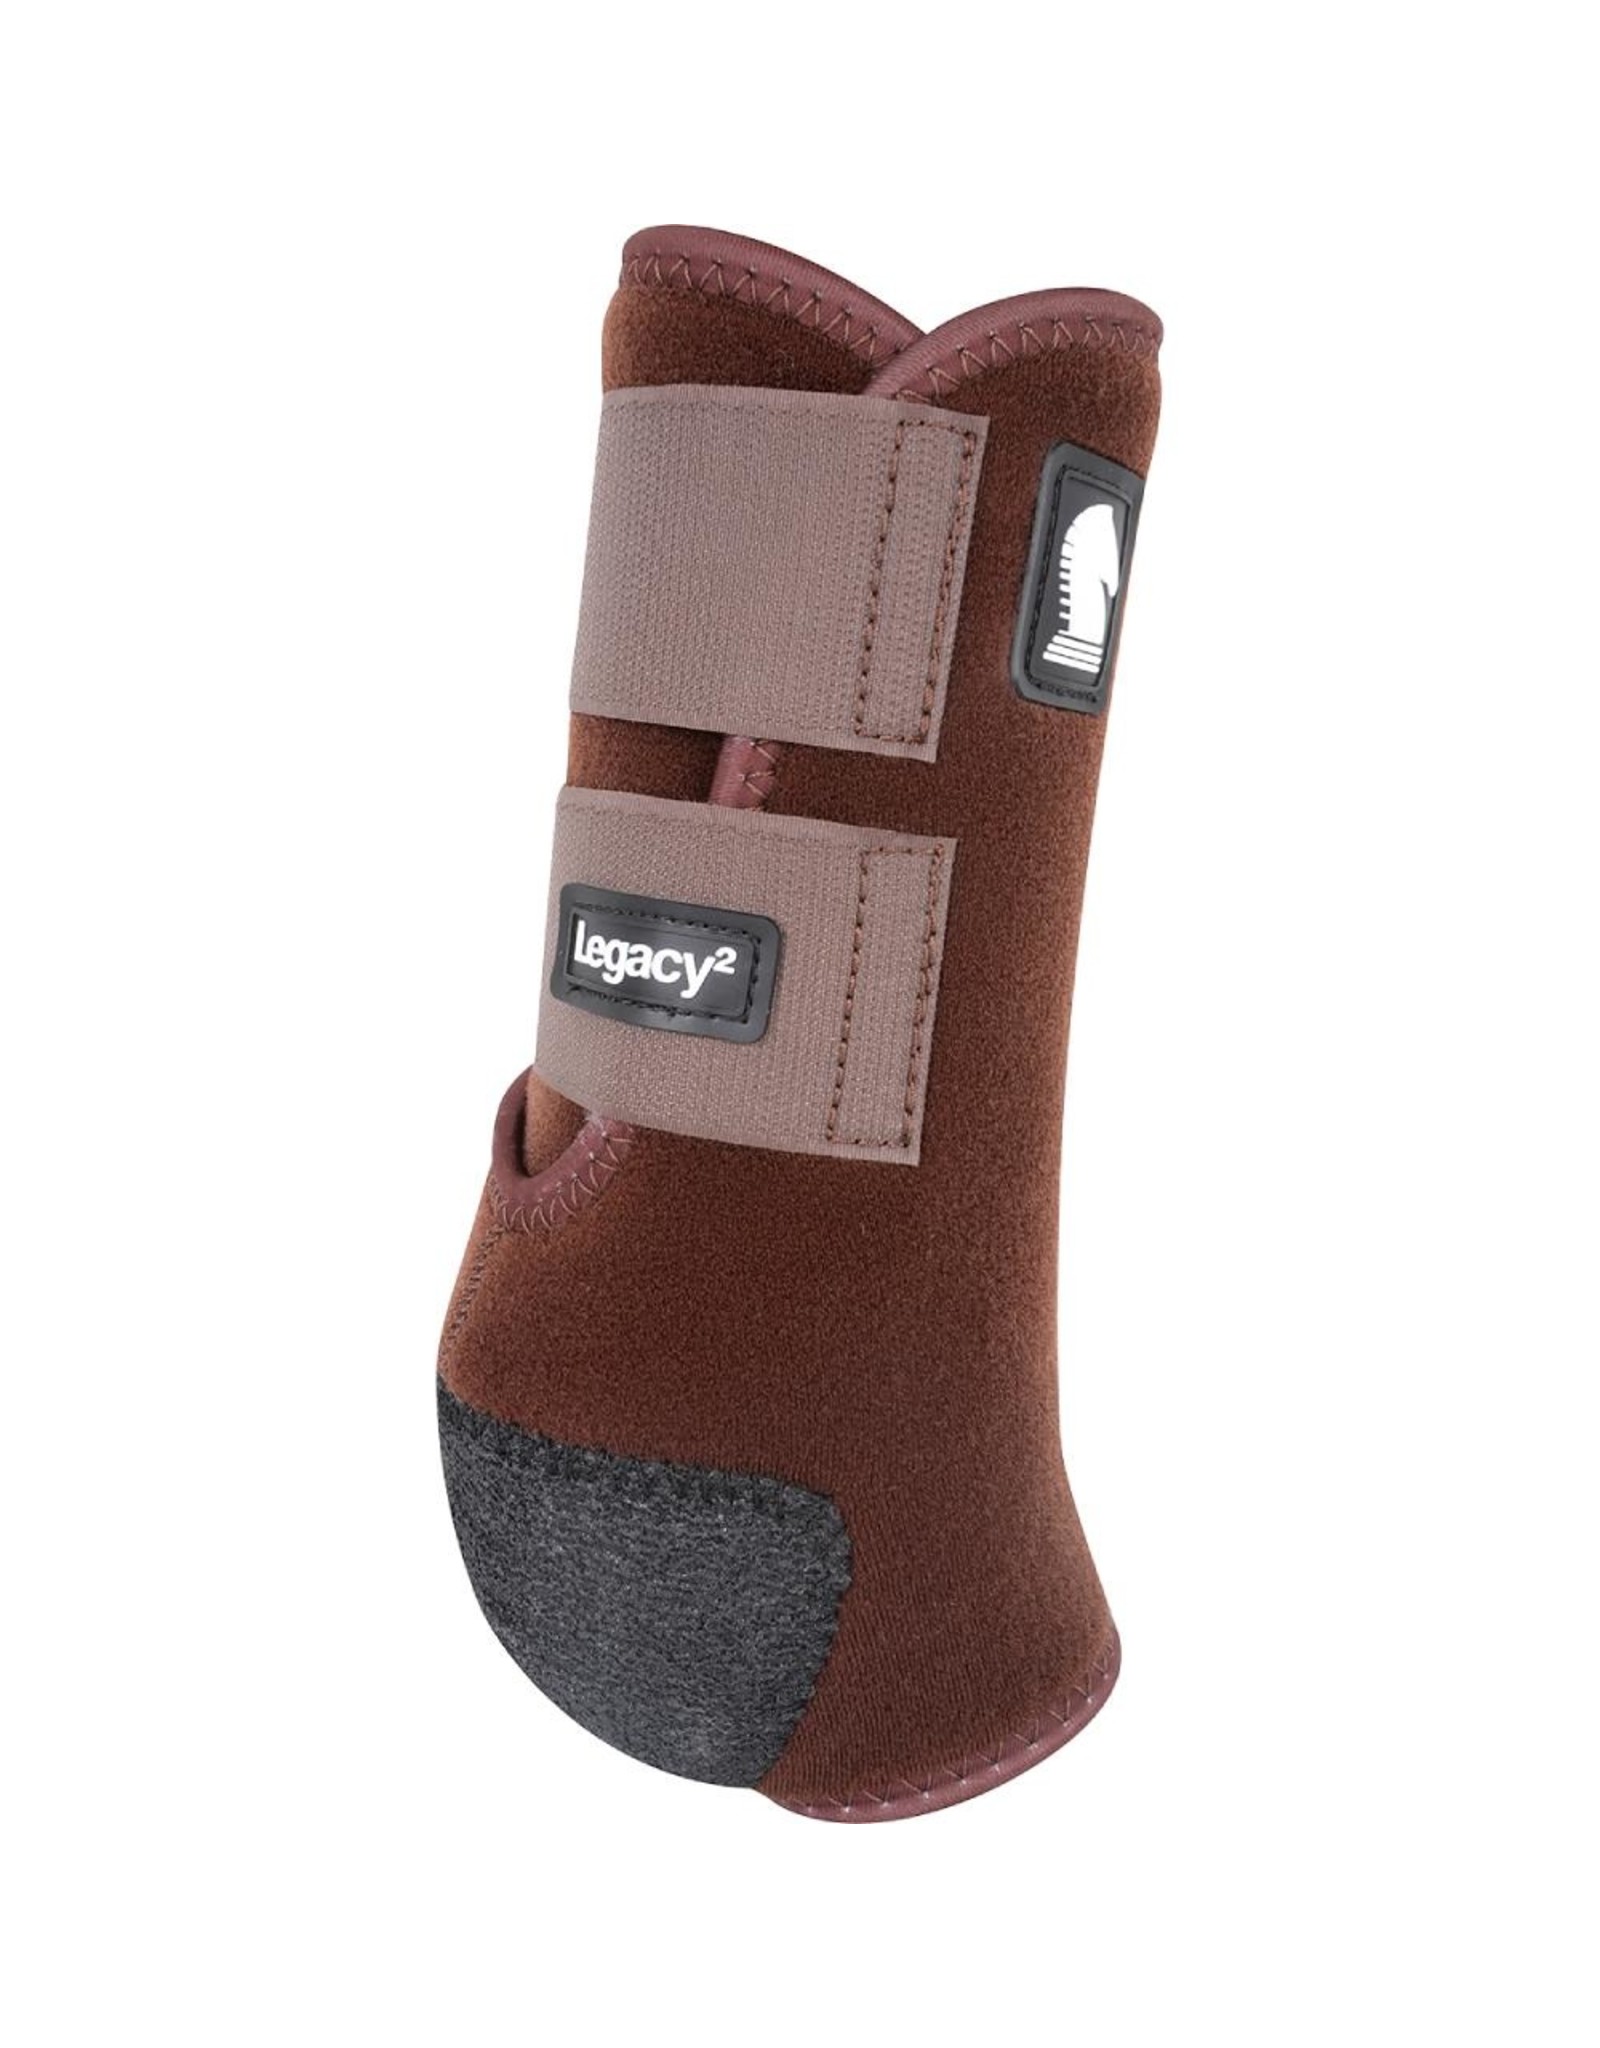 Classic Equine Classic Equine Legacy Chocolate CLS202CHL Splint Hind Boots Sz. Large